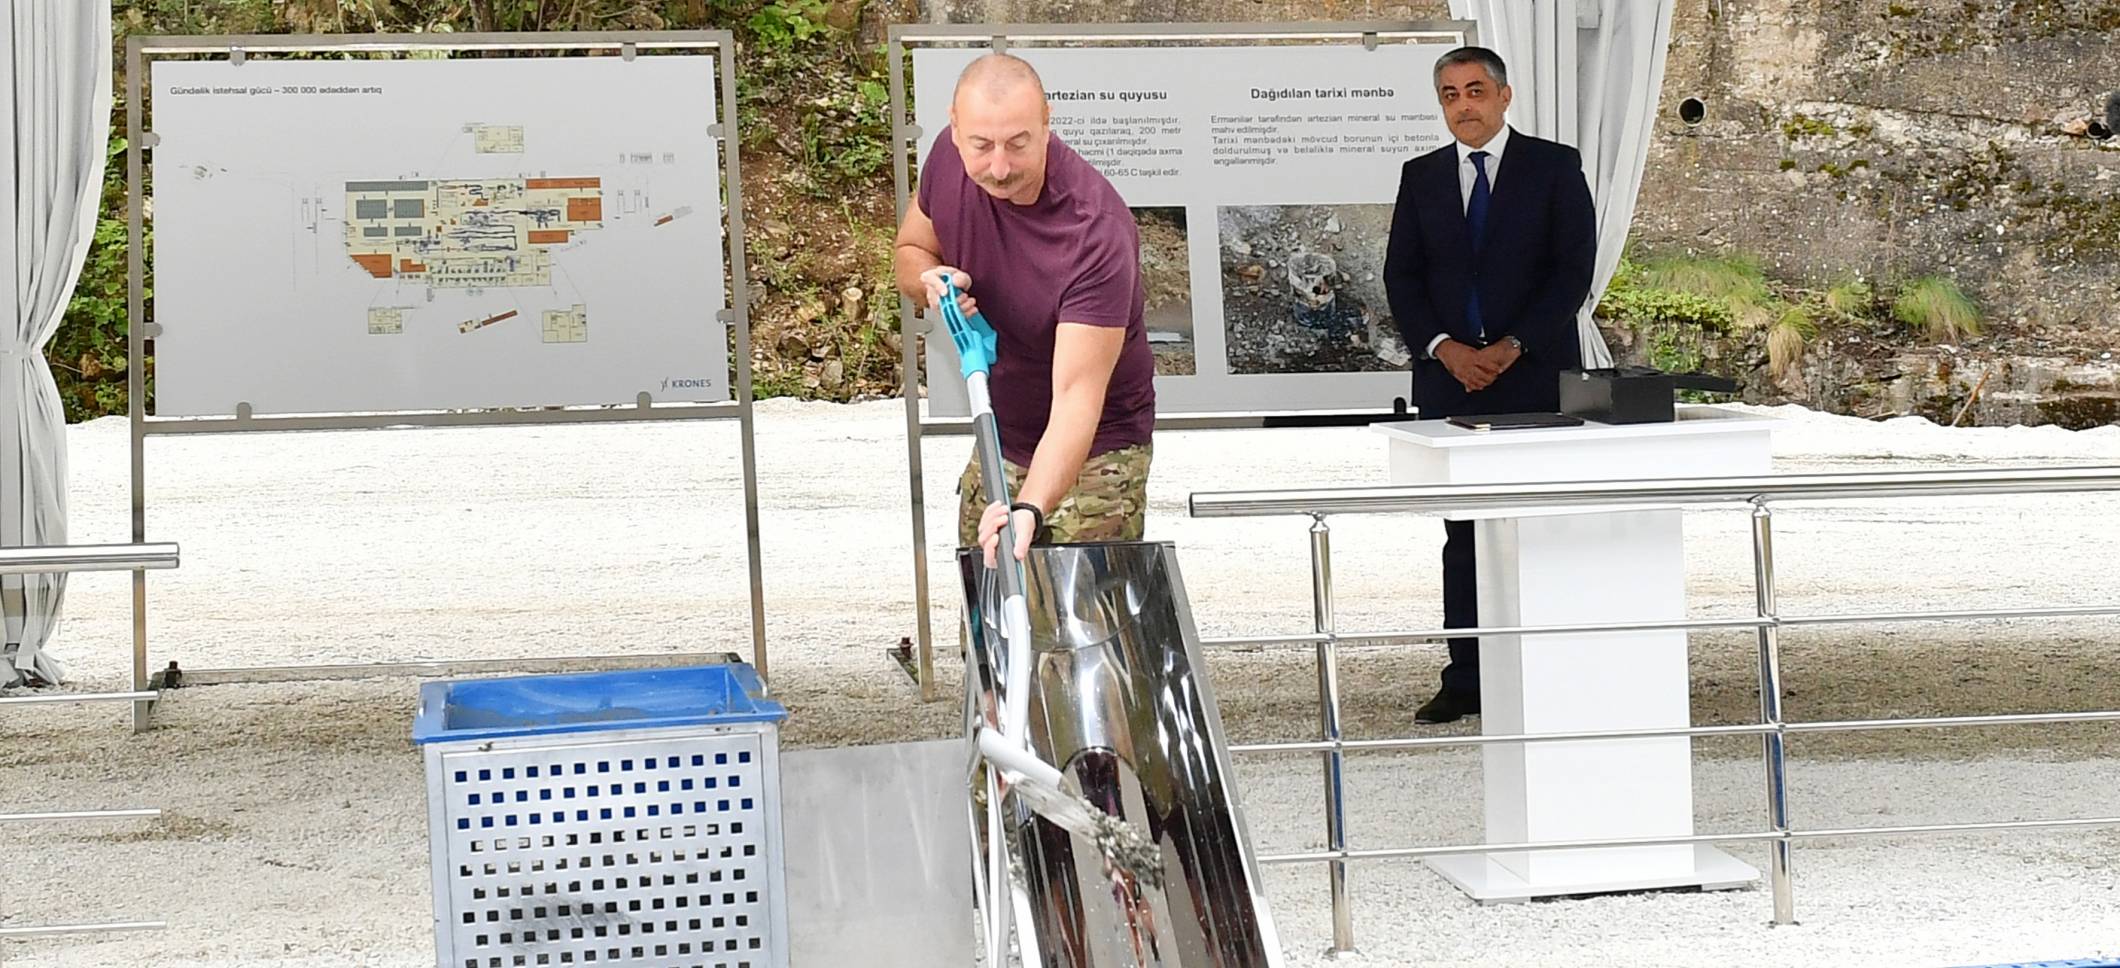 Foundation stone was laid for “Istisu” mineral water plant in Kalbajar